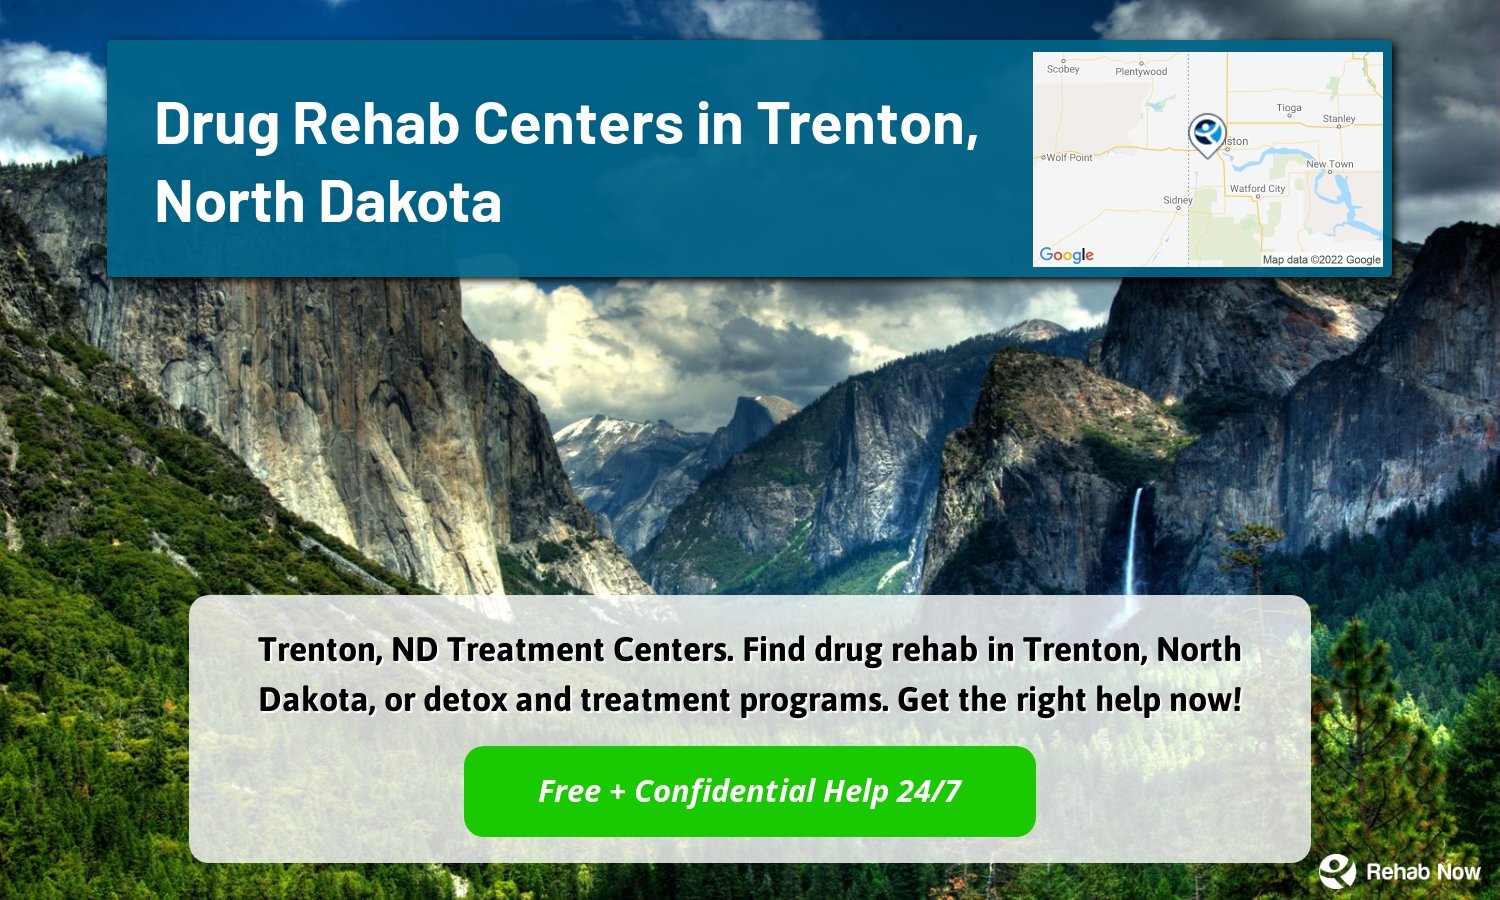 Trenton, ND Treatment Centers. Find drug rehab in Trenton, North Dakota, or detox and treatment programs. Get the right help now!